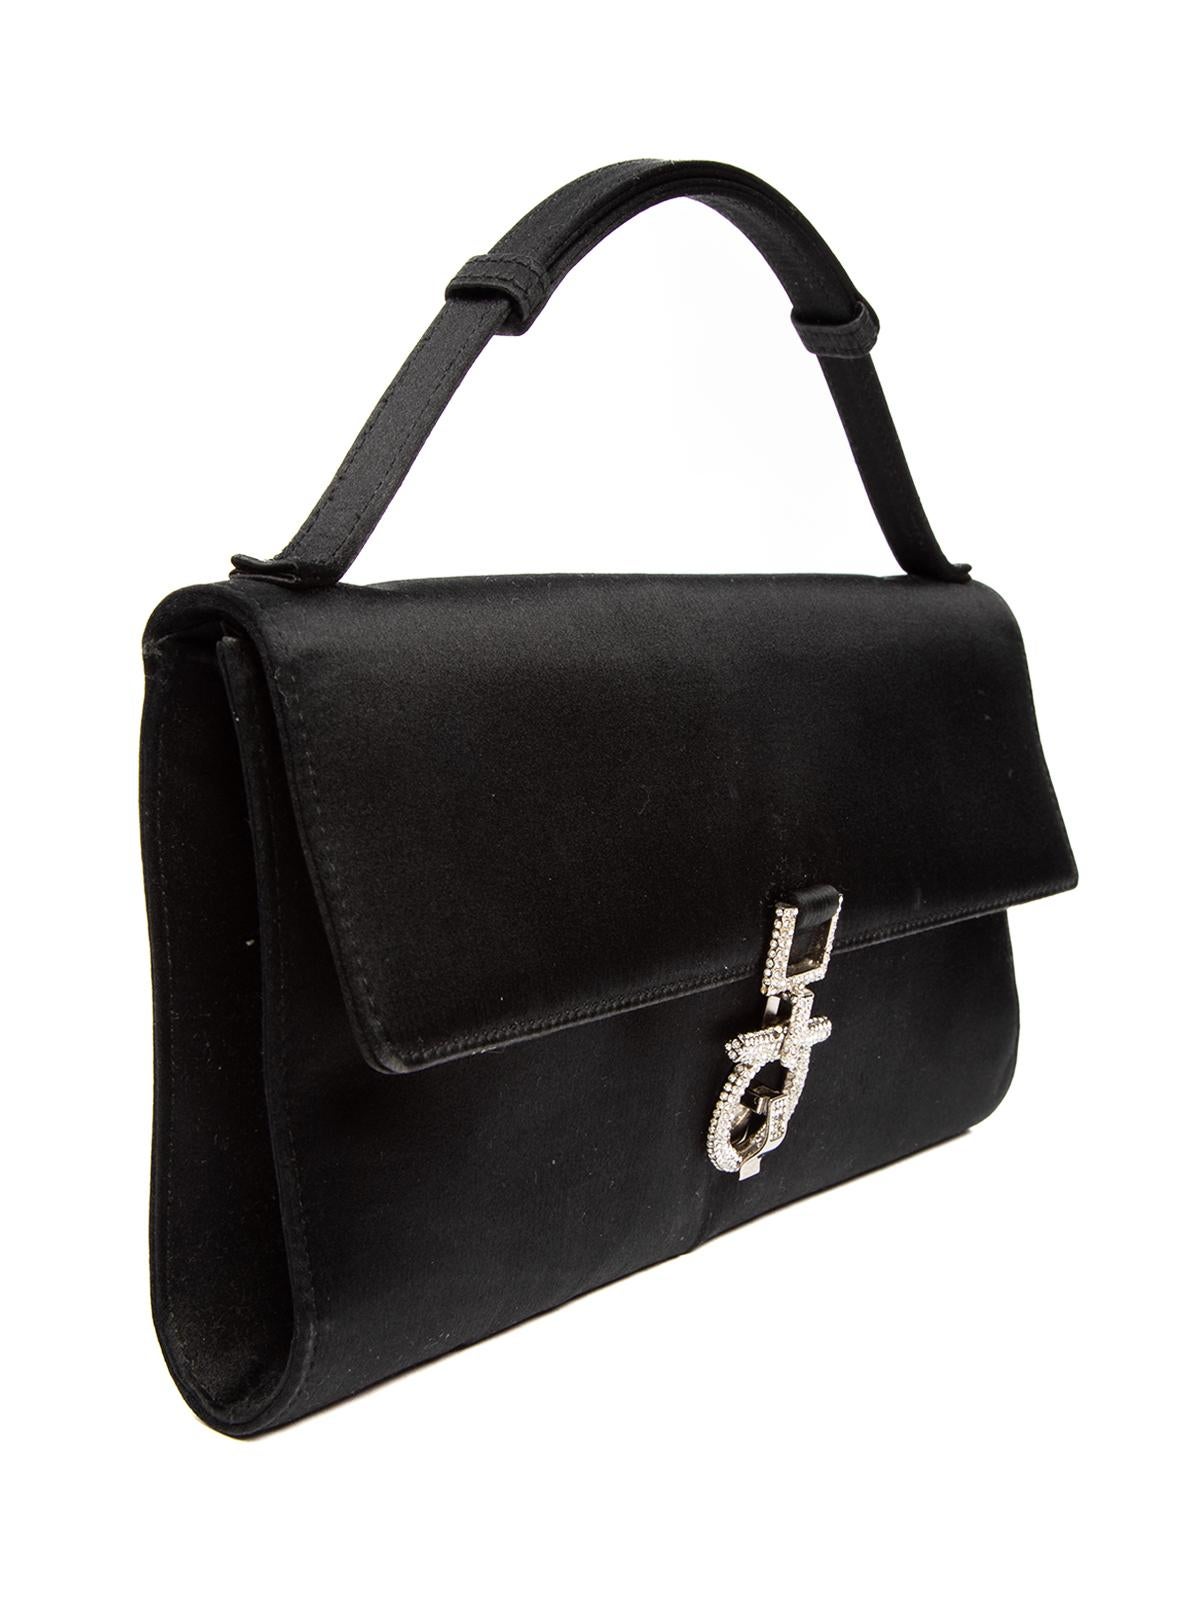 CONDITION is Good. Minor wear to clutch is evident on this used Salvatore Ferragamo designer resale item. Details Colour - black Material - satin Style - clutch Flaps etc Top handle Hardware - silver metal and diamante One main compartment Interior